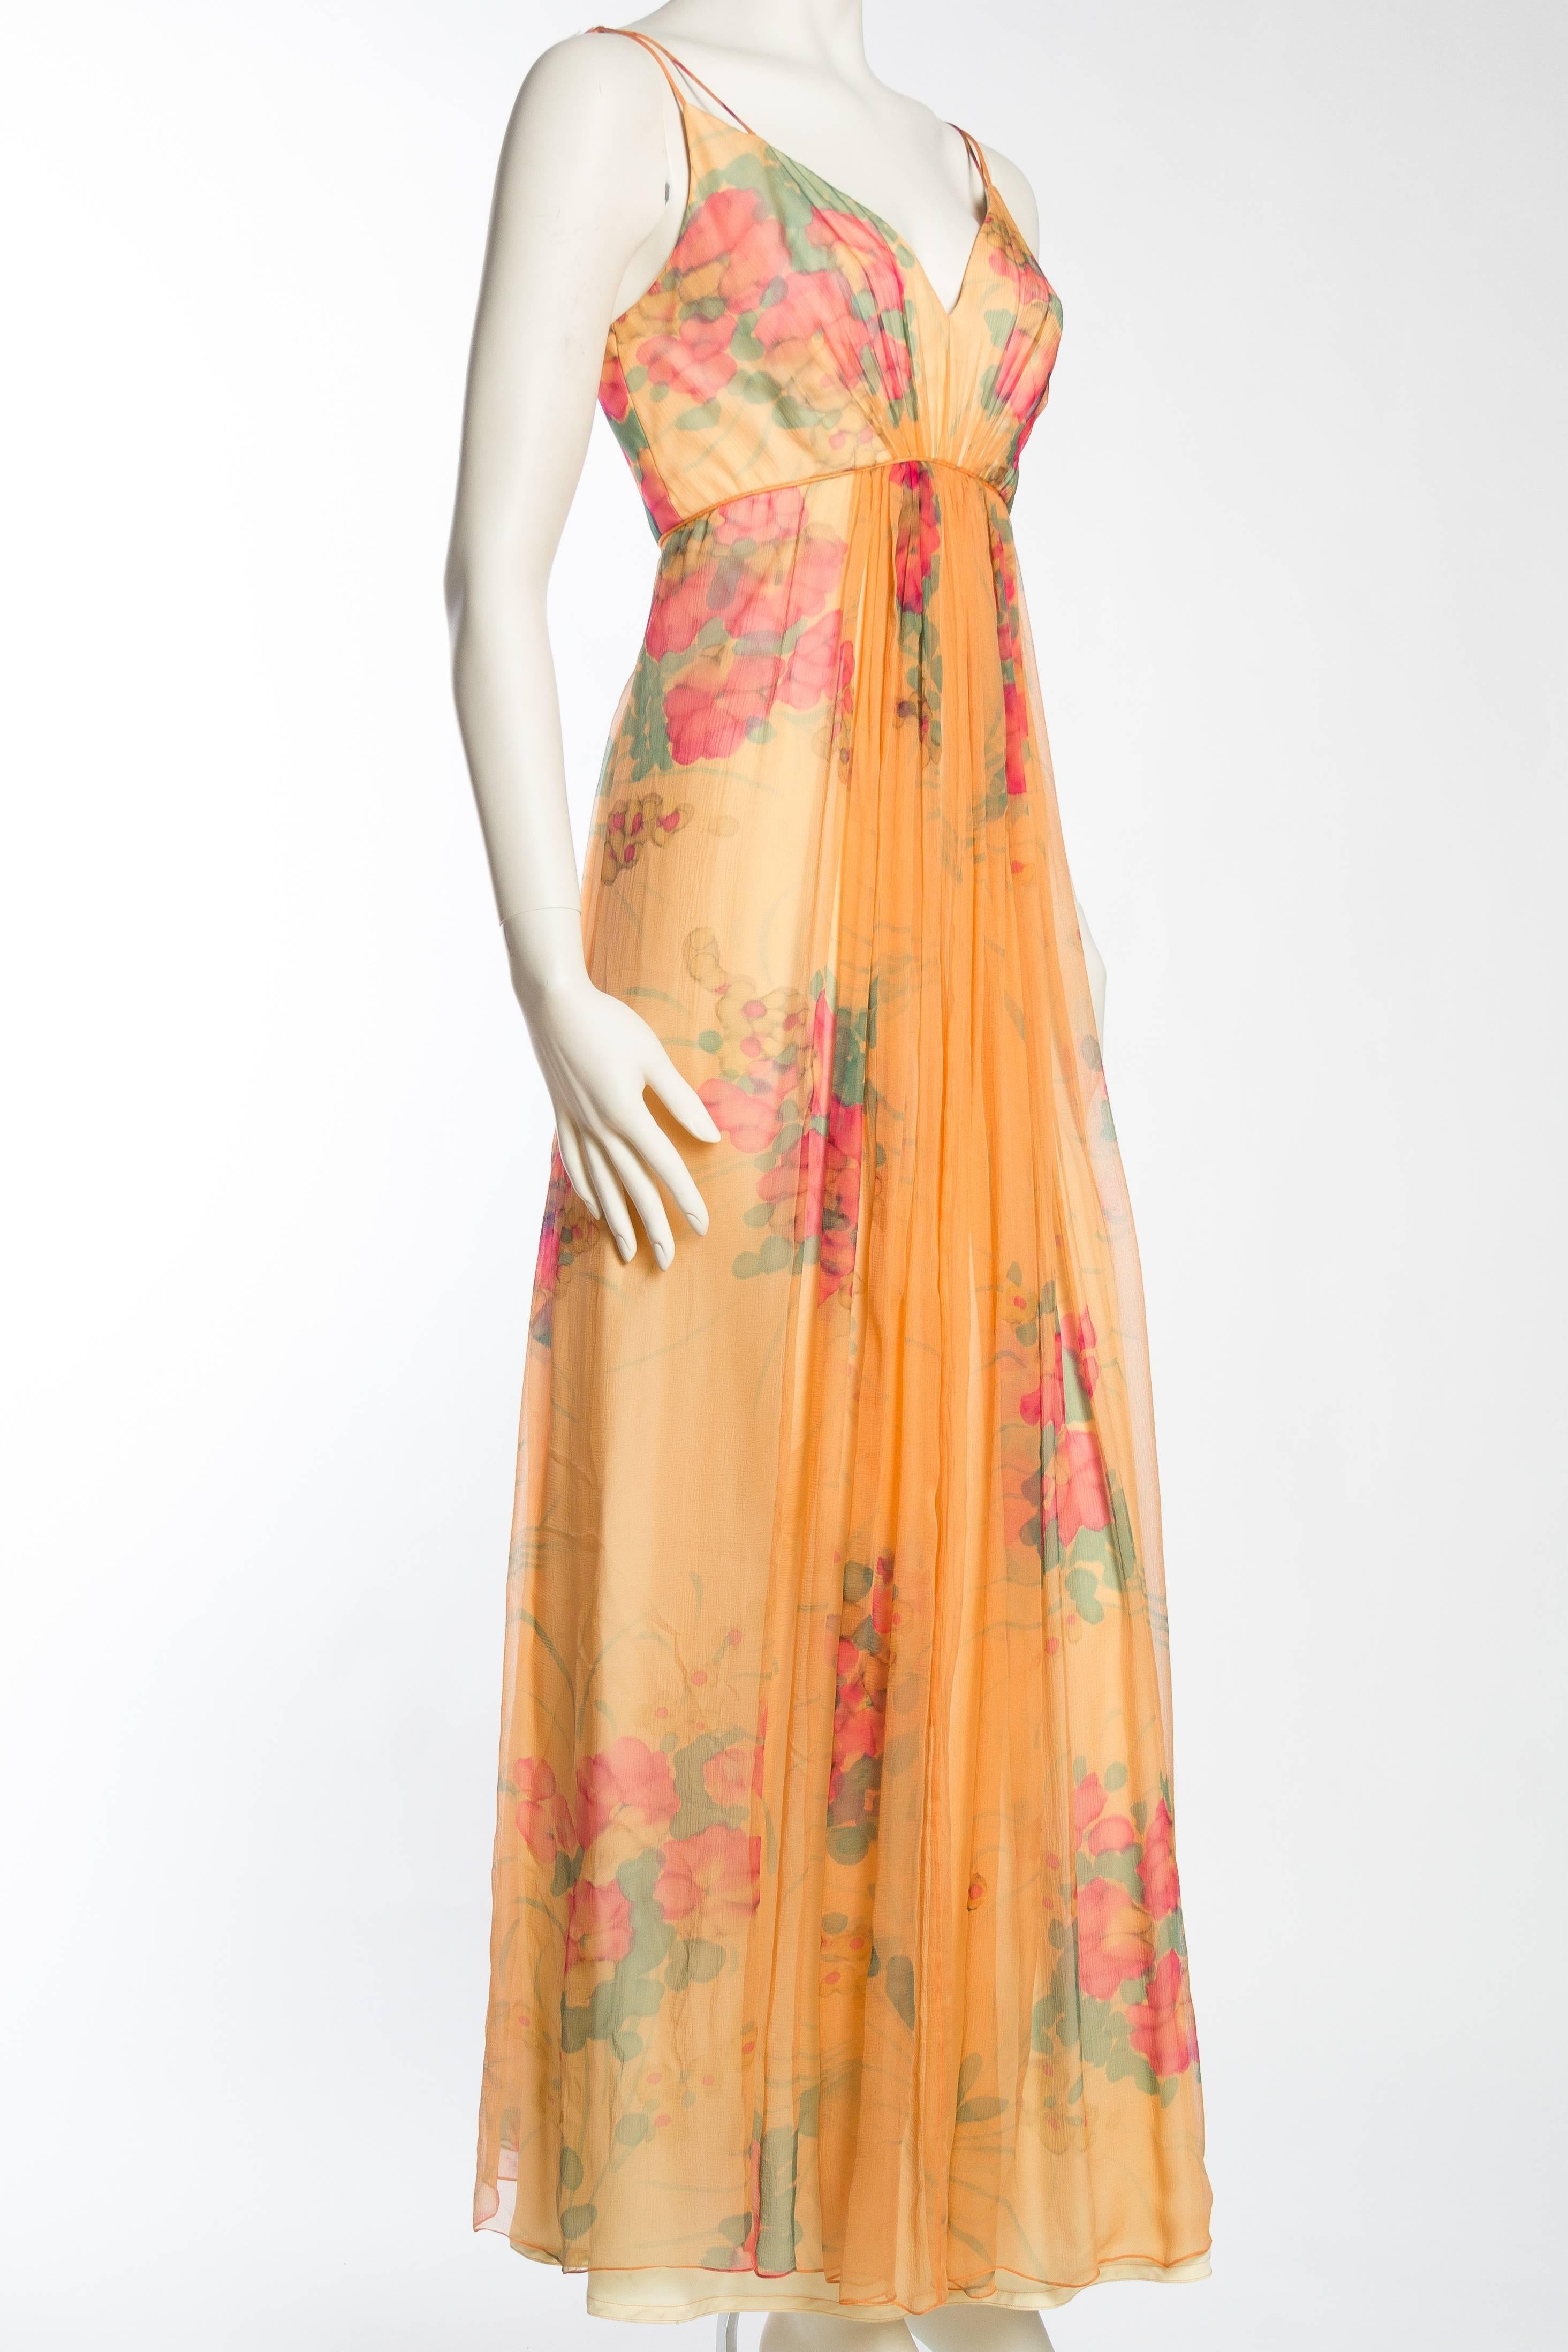 Women's 1970s Alfred Bosand Hand Painted Silk Chiffon Gown with Cape